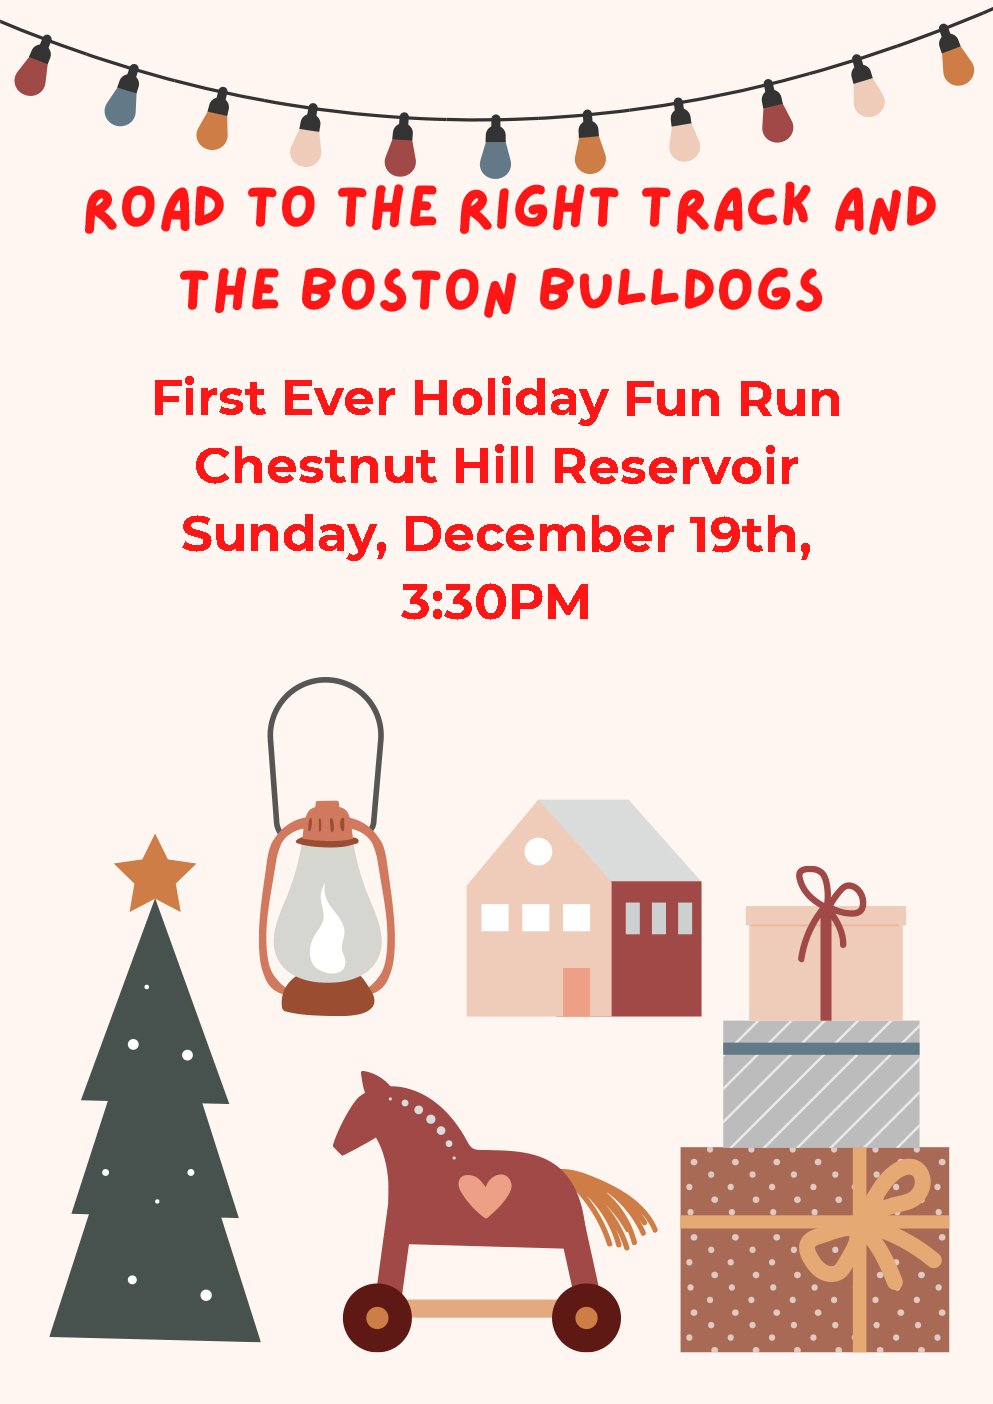 D-14 Community Hosts First Ever Holiday Fun Run